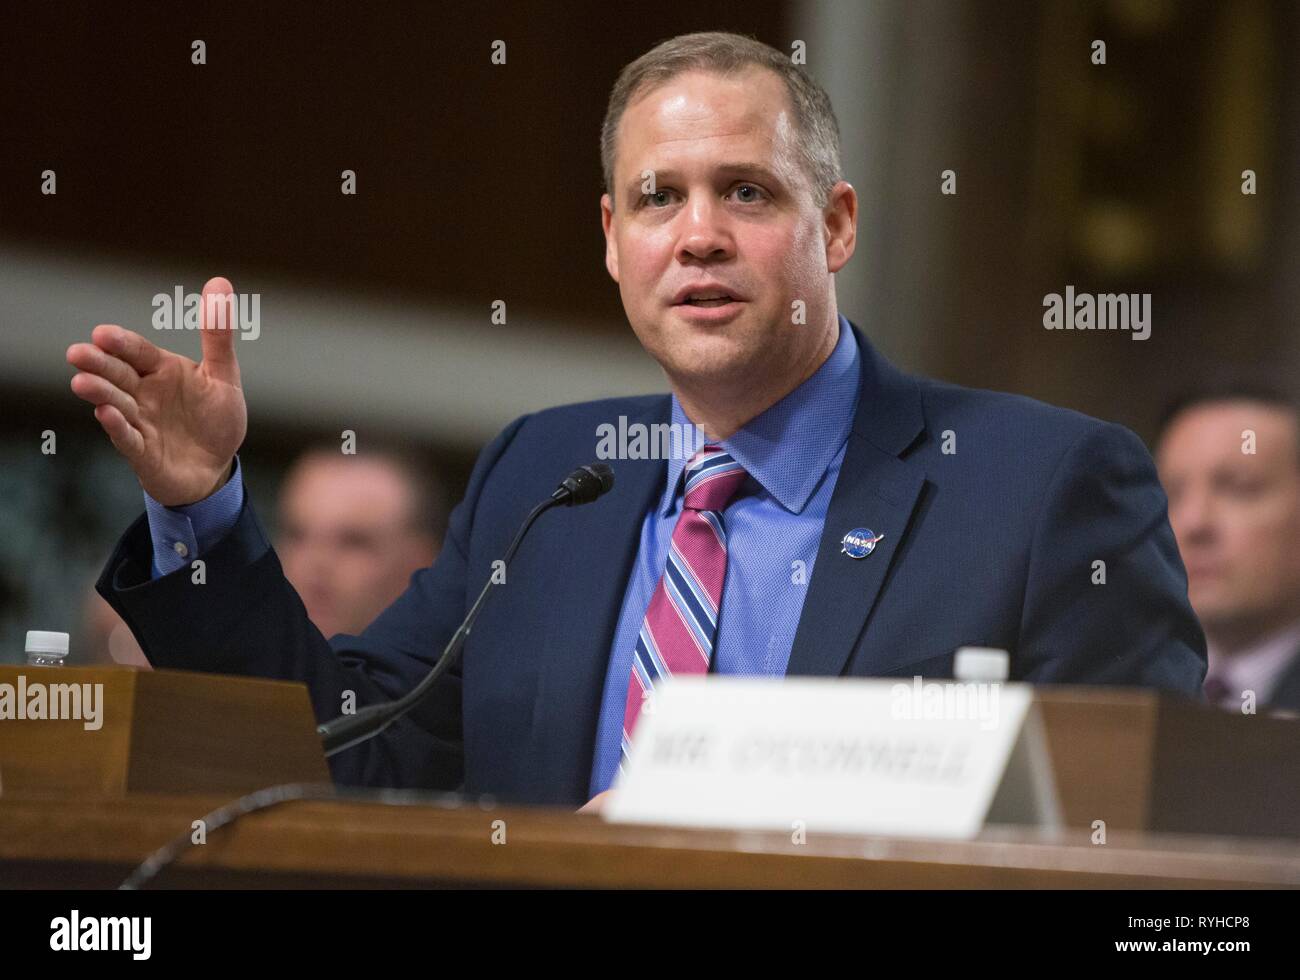 Washington, United States Of America. 13th Mar, 2019. NASA Administrator Jim Bridenstine during a hearing of the Senate Committee on Commerce, Science, and Transportation on The New Space Race: Ensuring U.S. Global Leadership on the Final Frontier, at the Dirksen Senate Office Building March 13, 2019 in Washington. DC. Credit: Planetpix/Alamy Live News Stock Photo